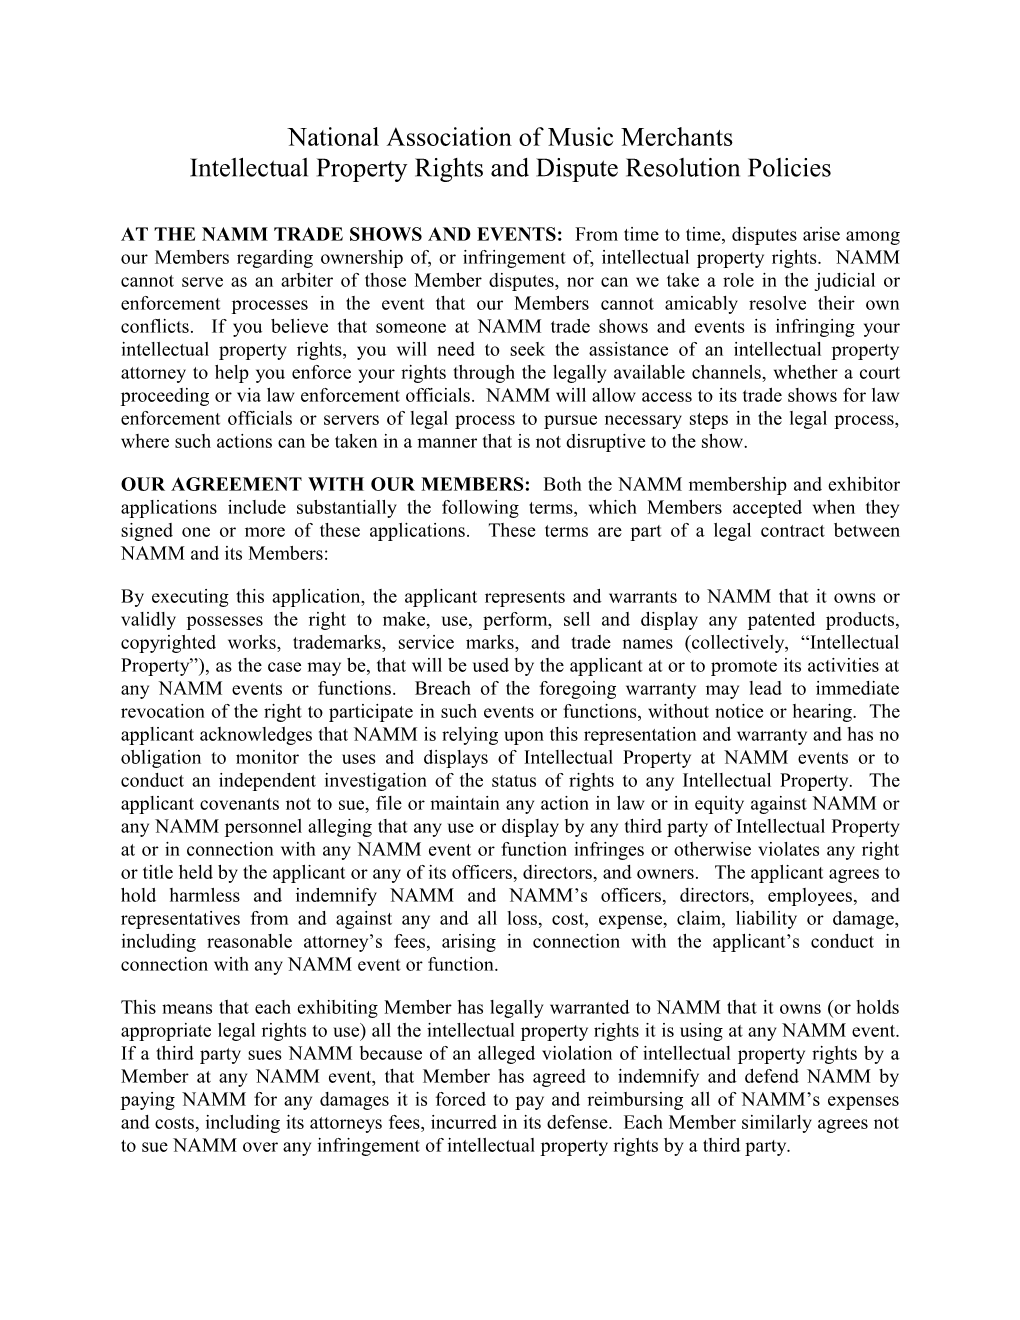 National Association of Music Merchants Intellectual Property Rights and Dispute Resolution